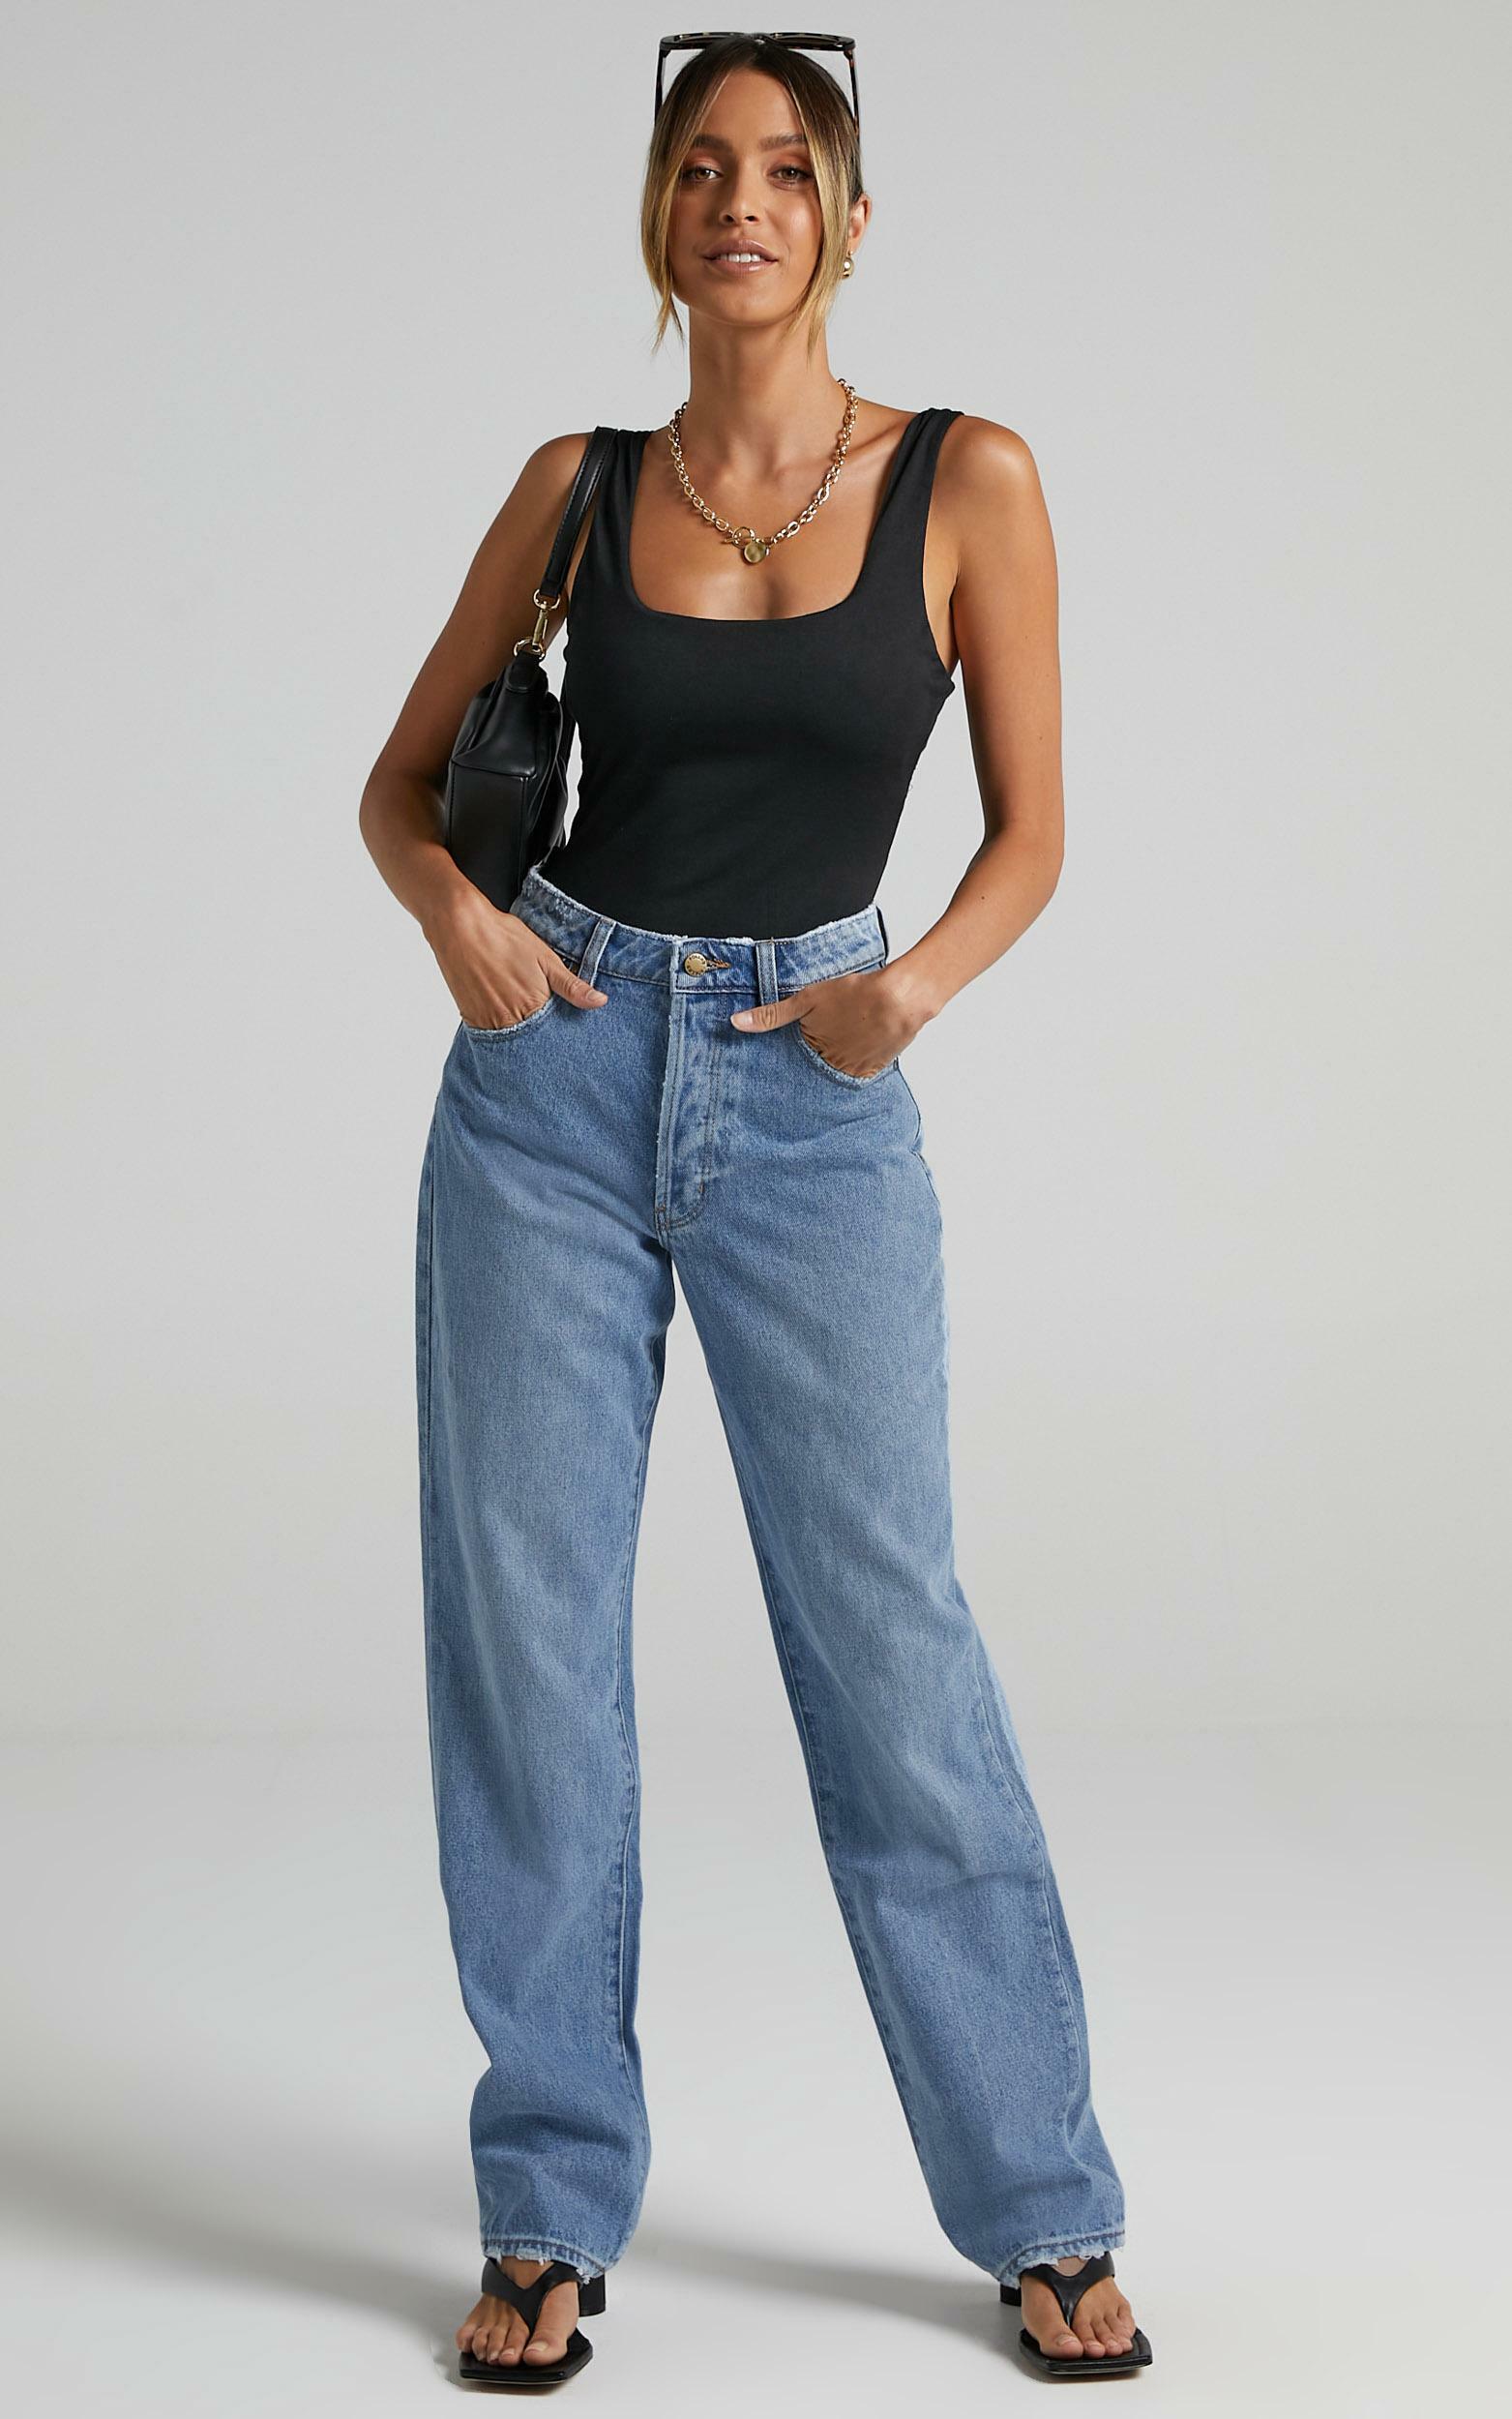 Rolla's - Classic Straight Jean in 90s Blue - 06, BLU1, hi-res image number null